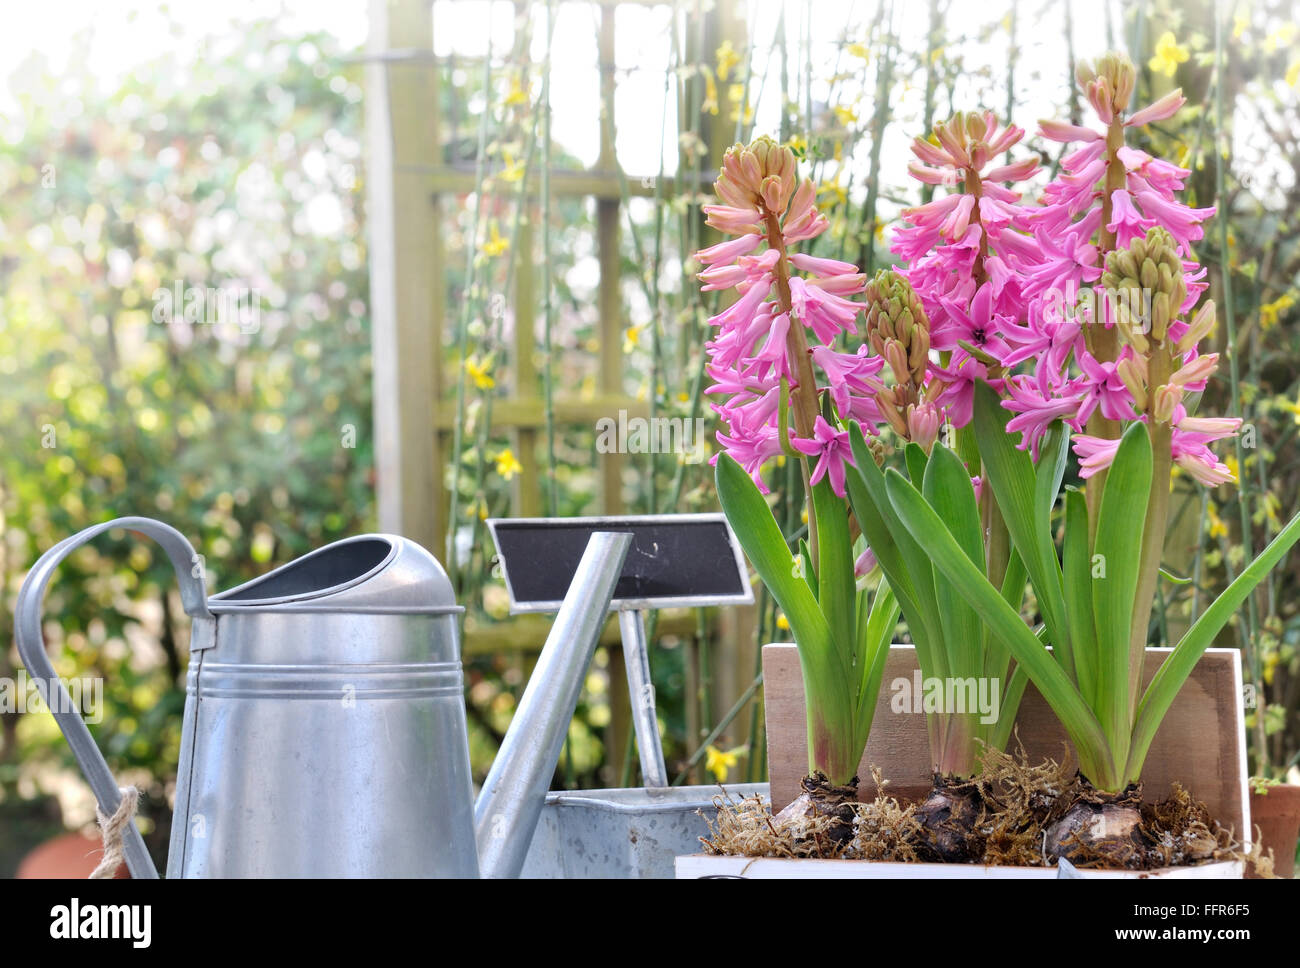 Potted hyacinths with gardening accessories in garden Stock Photo